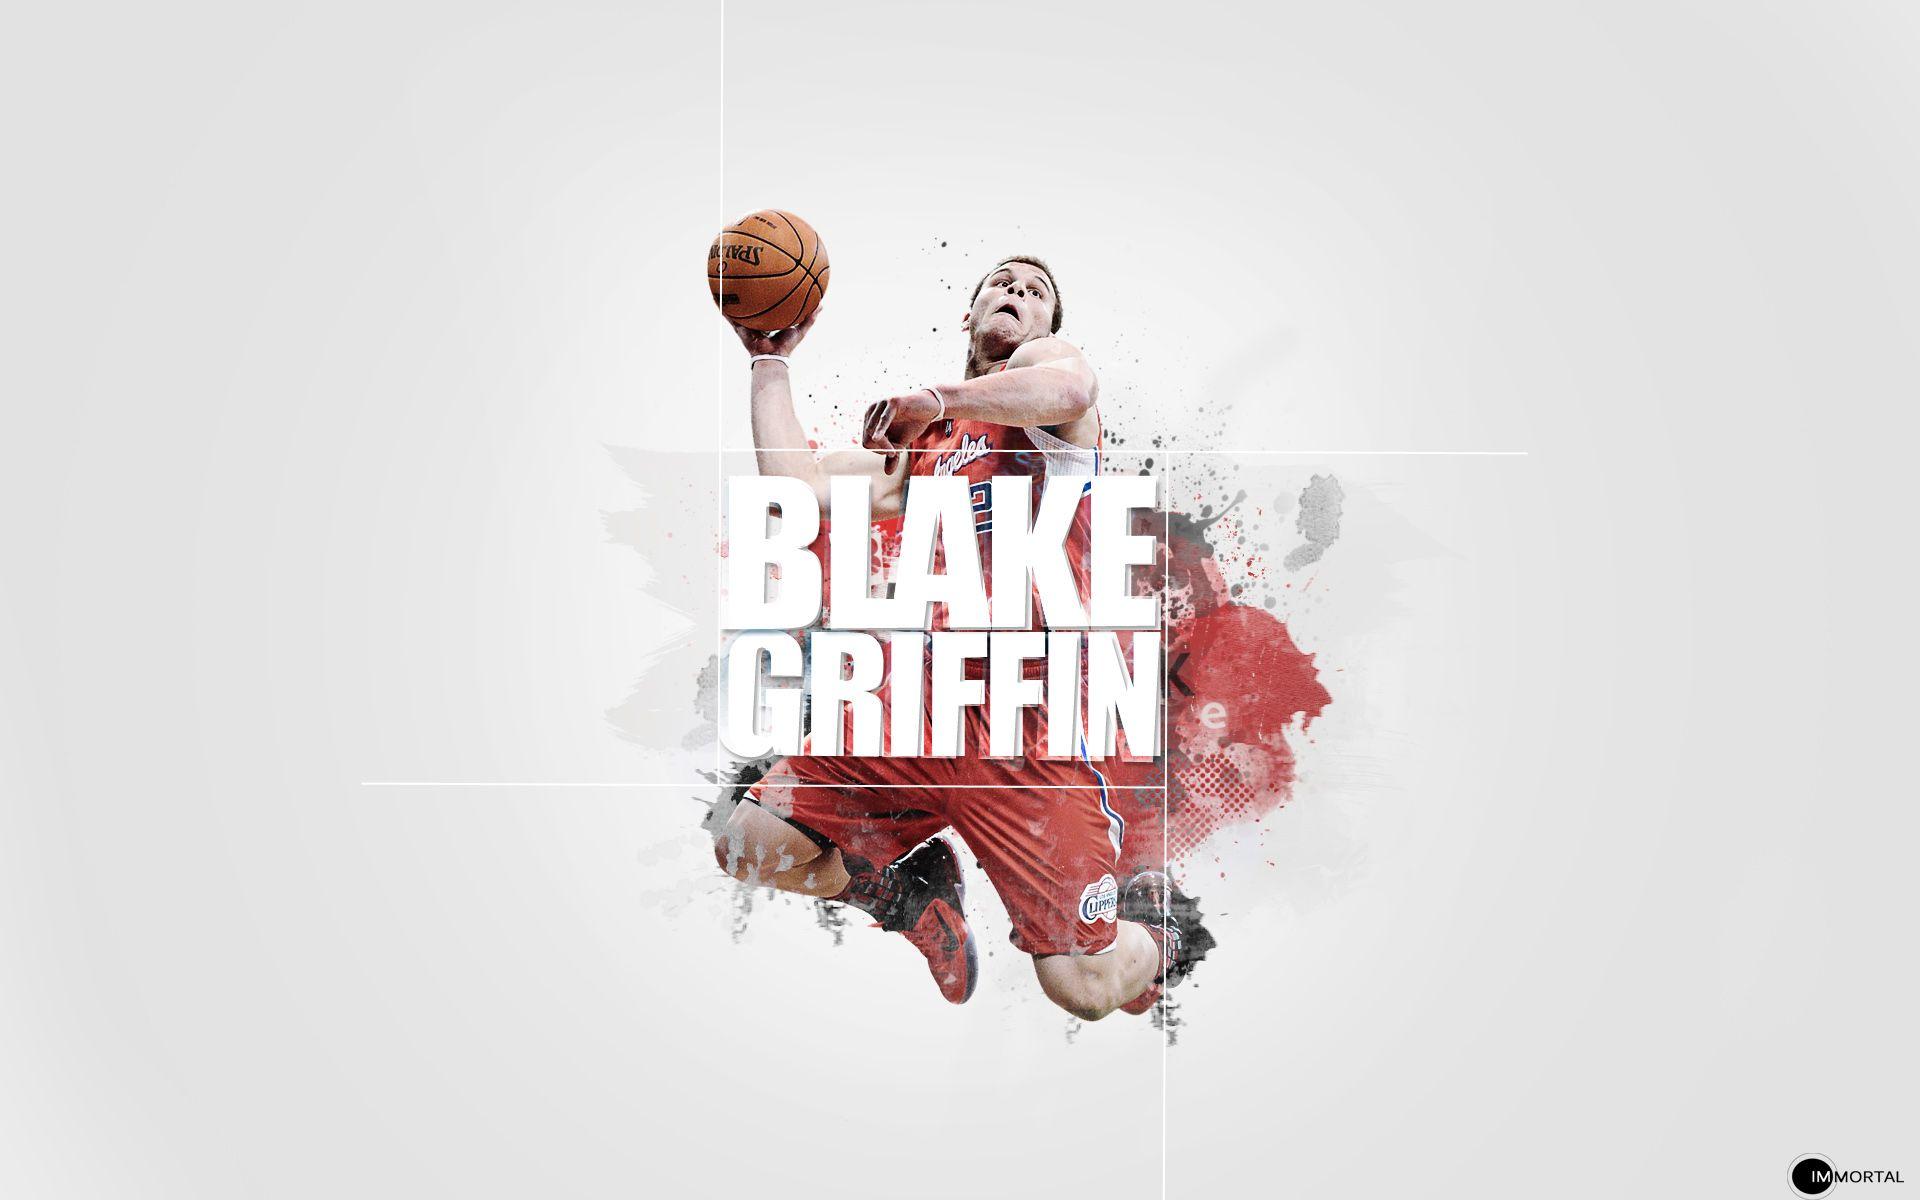 Laptop Blake Griffin Wallpaper, Wallpaper and Picture BG